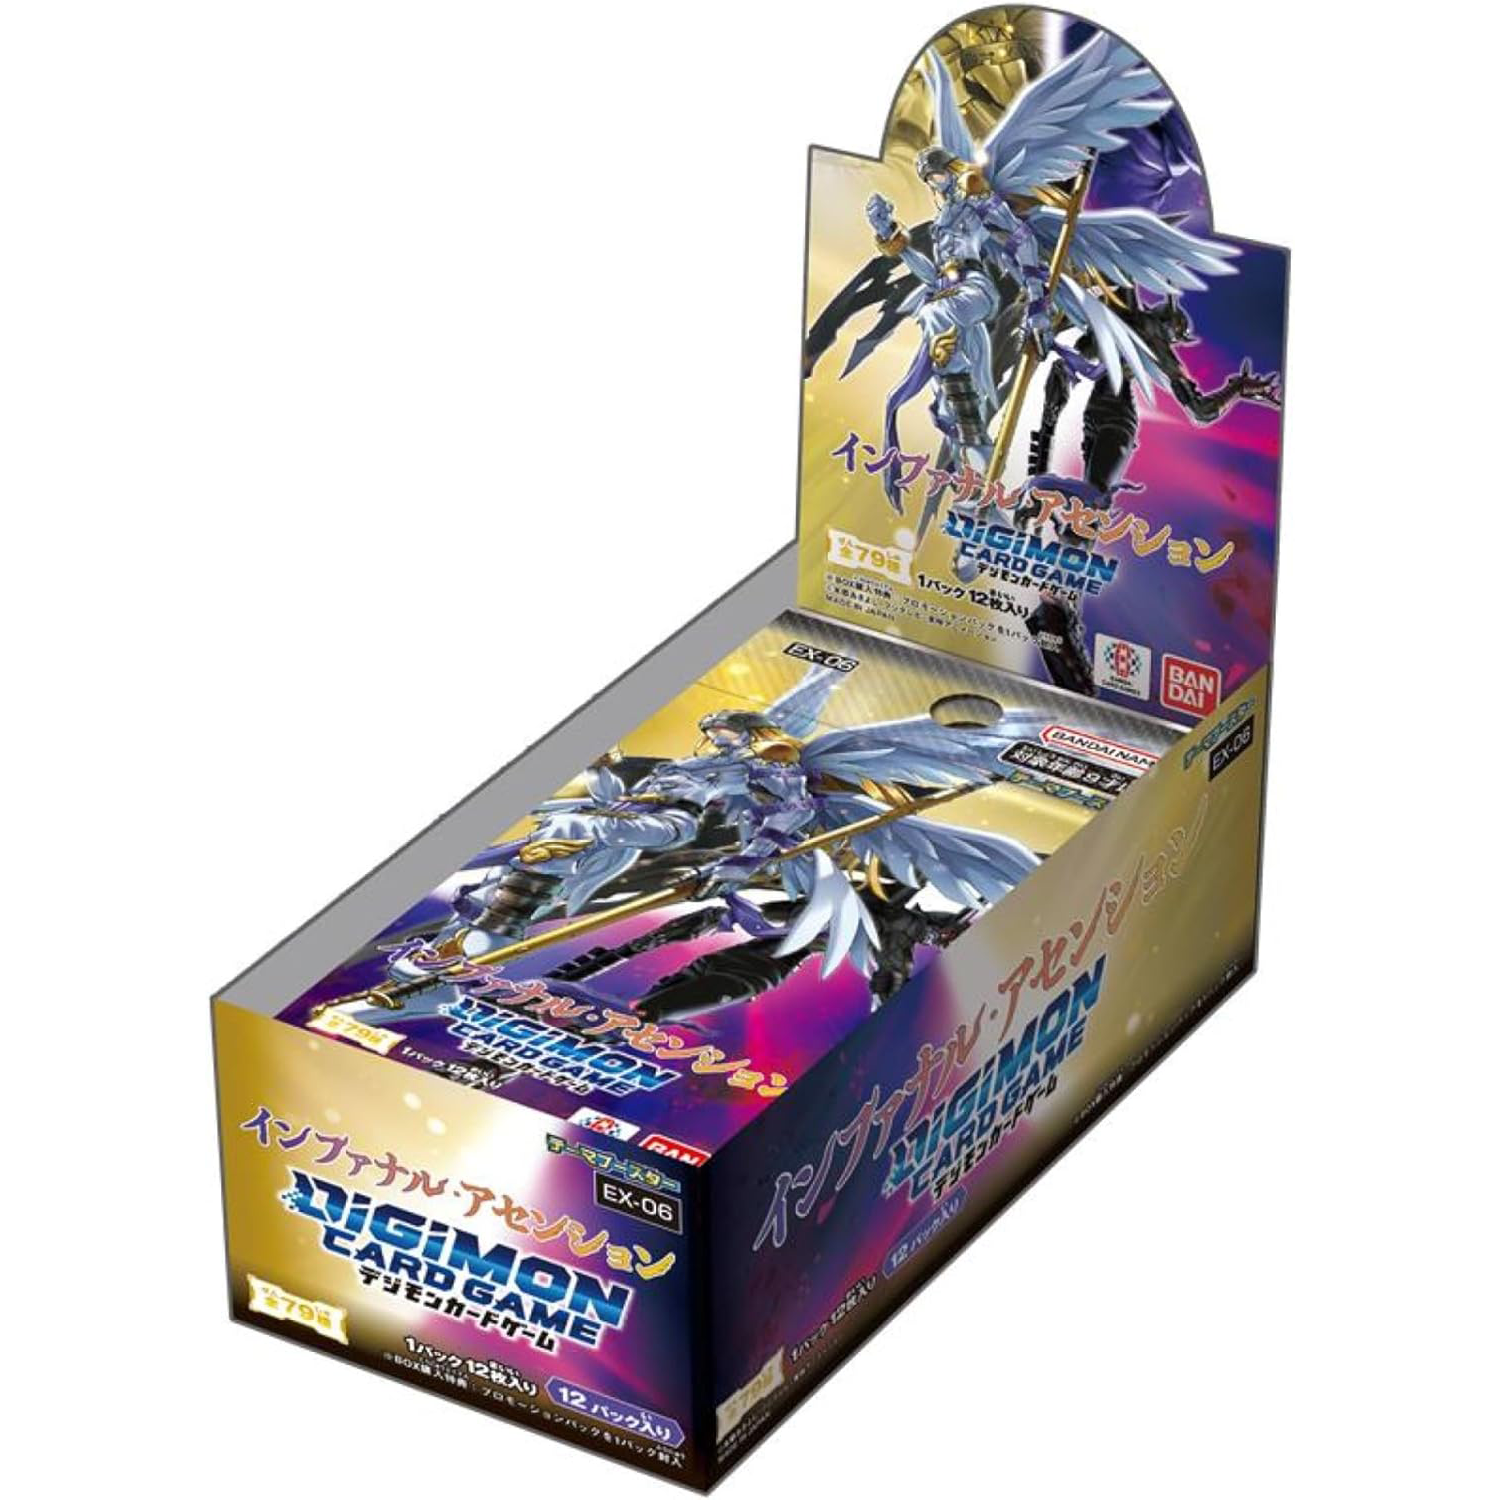 DIGIMON CARD GAME [EX-06] Theme Booster Infernal Ascension - Box